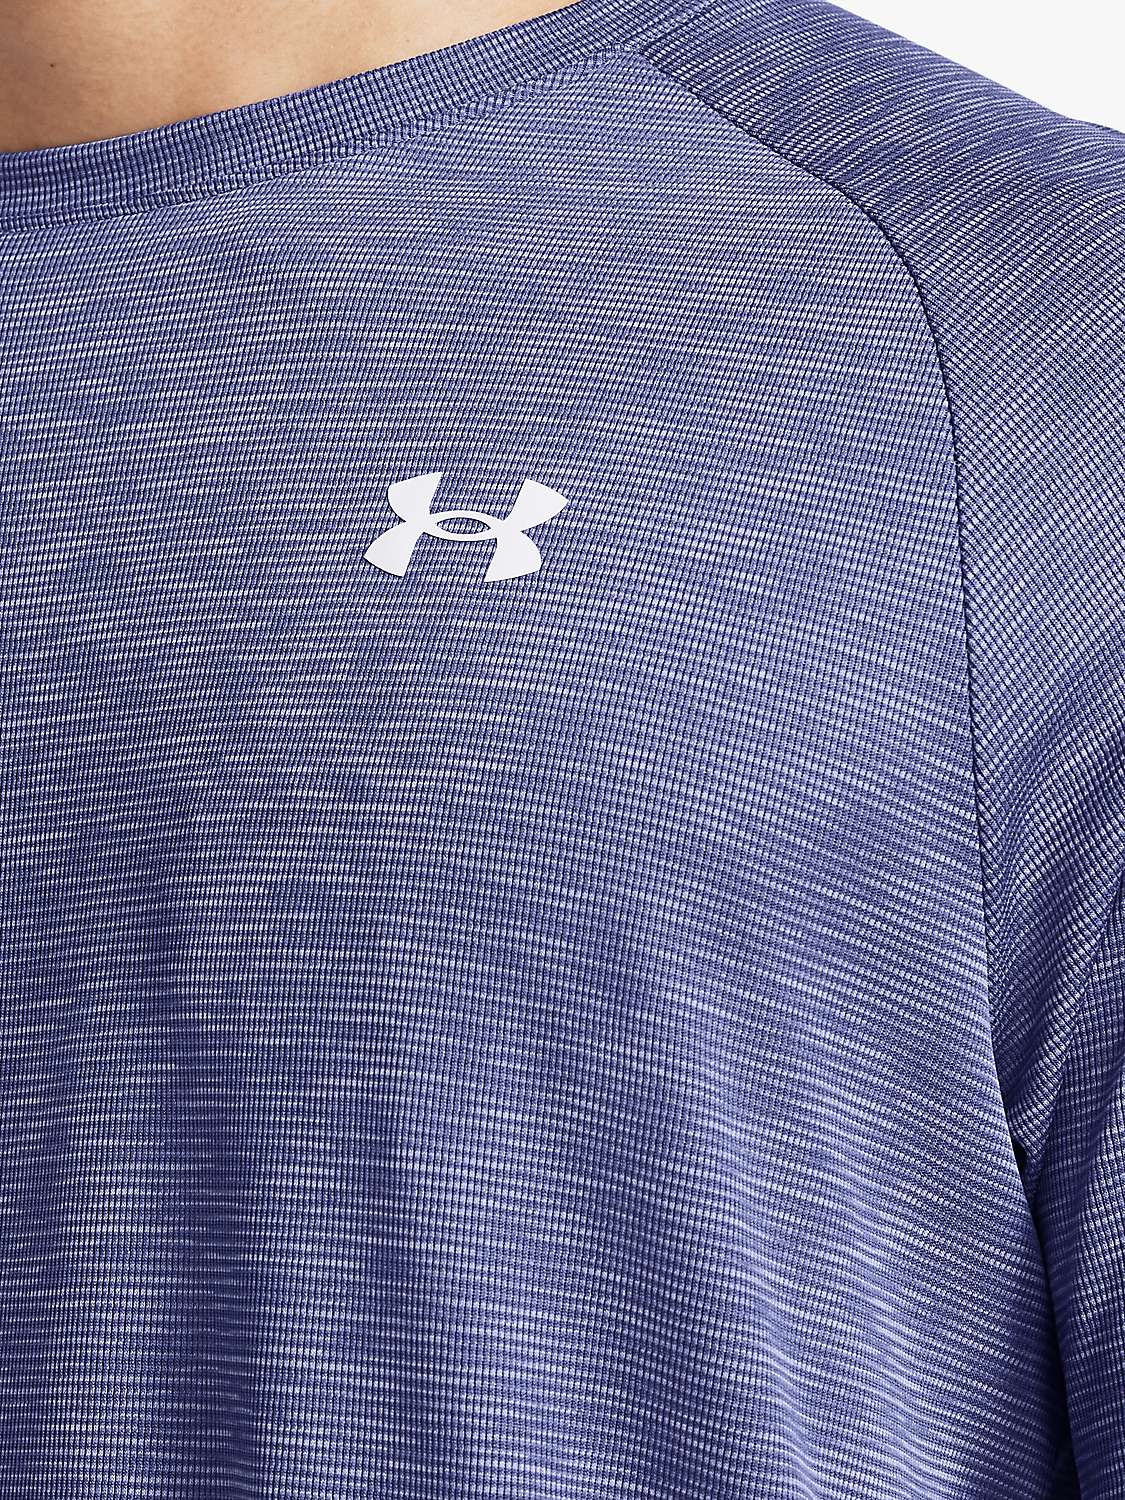 Buy Under Armour Tech Textured Gym Top, Starlight/White Online at johnlewis.com